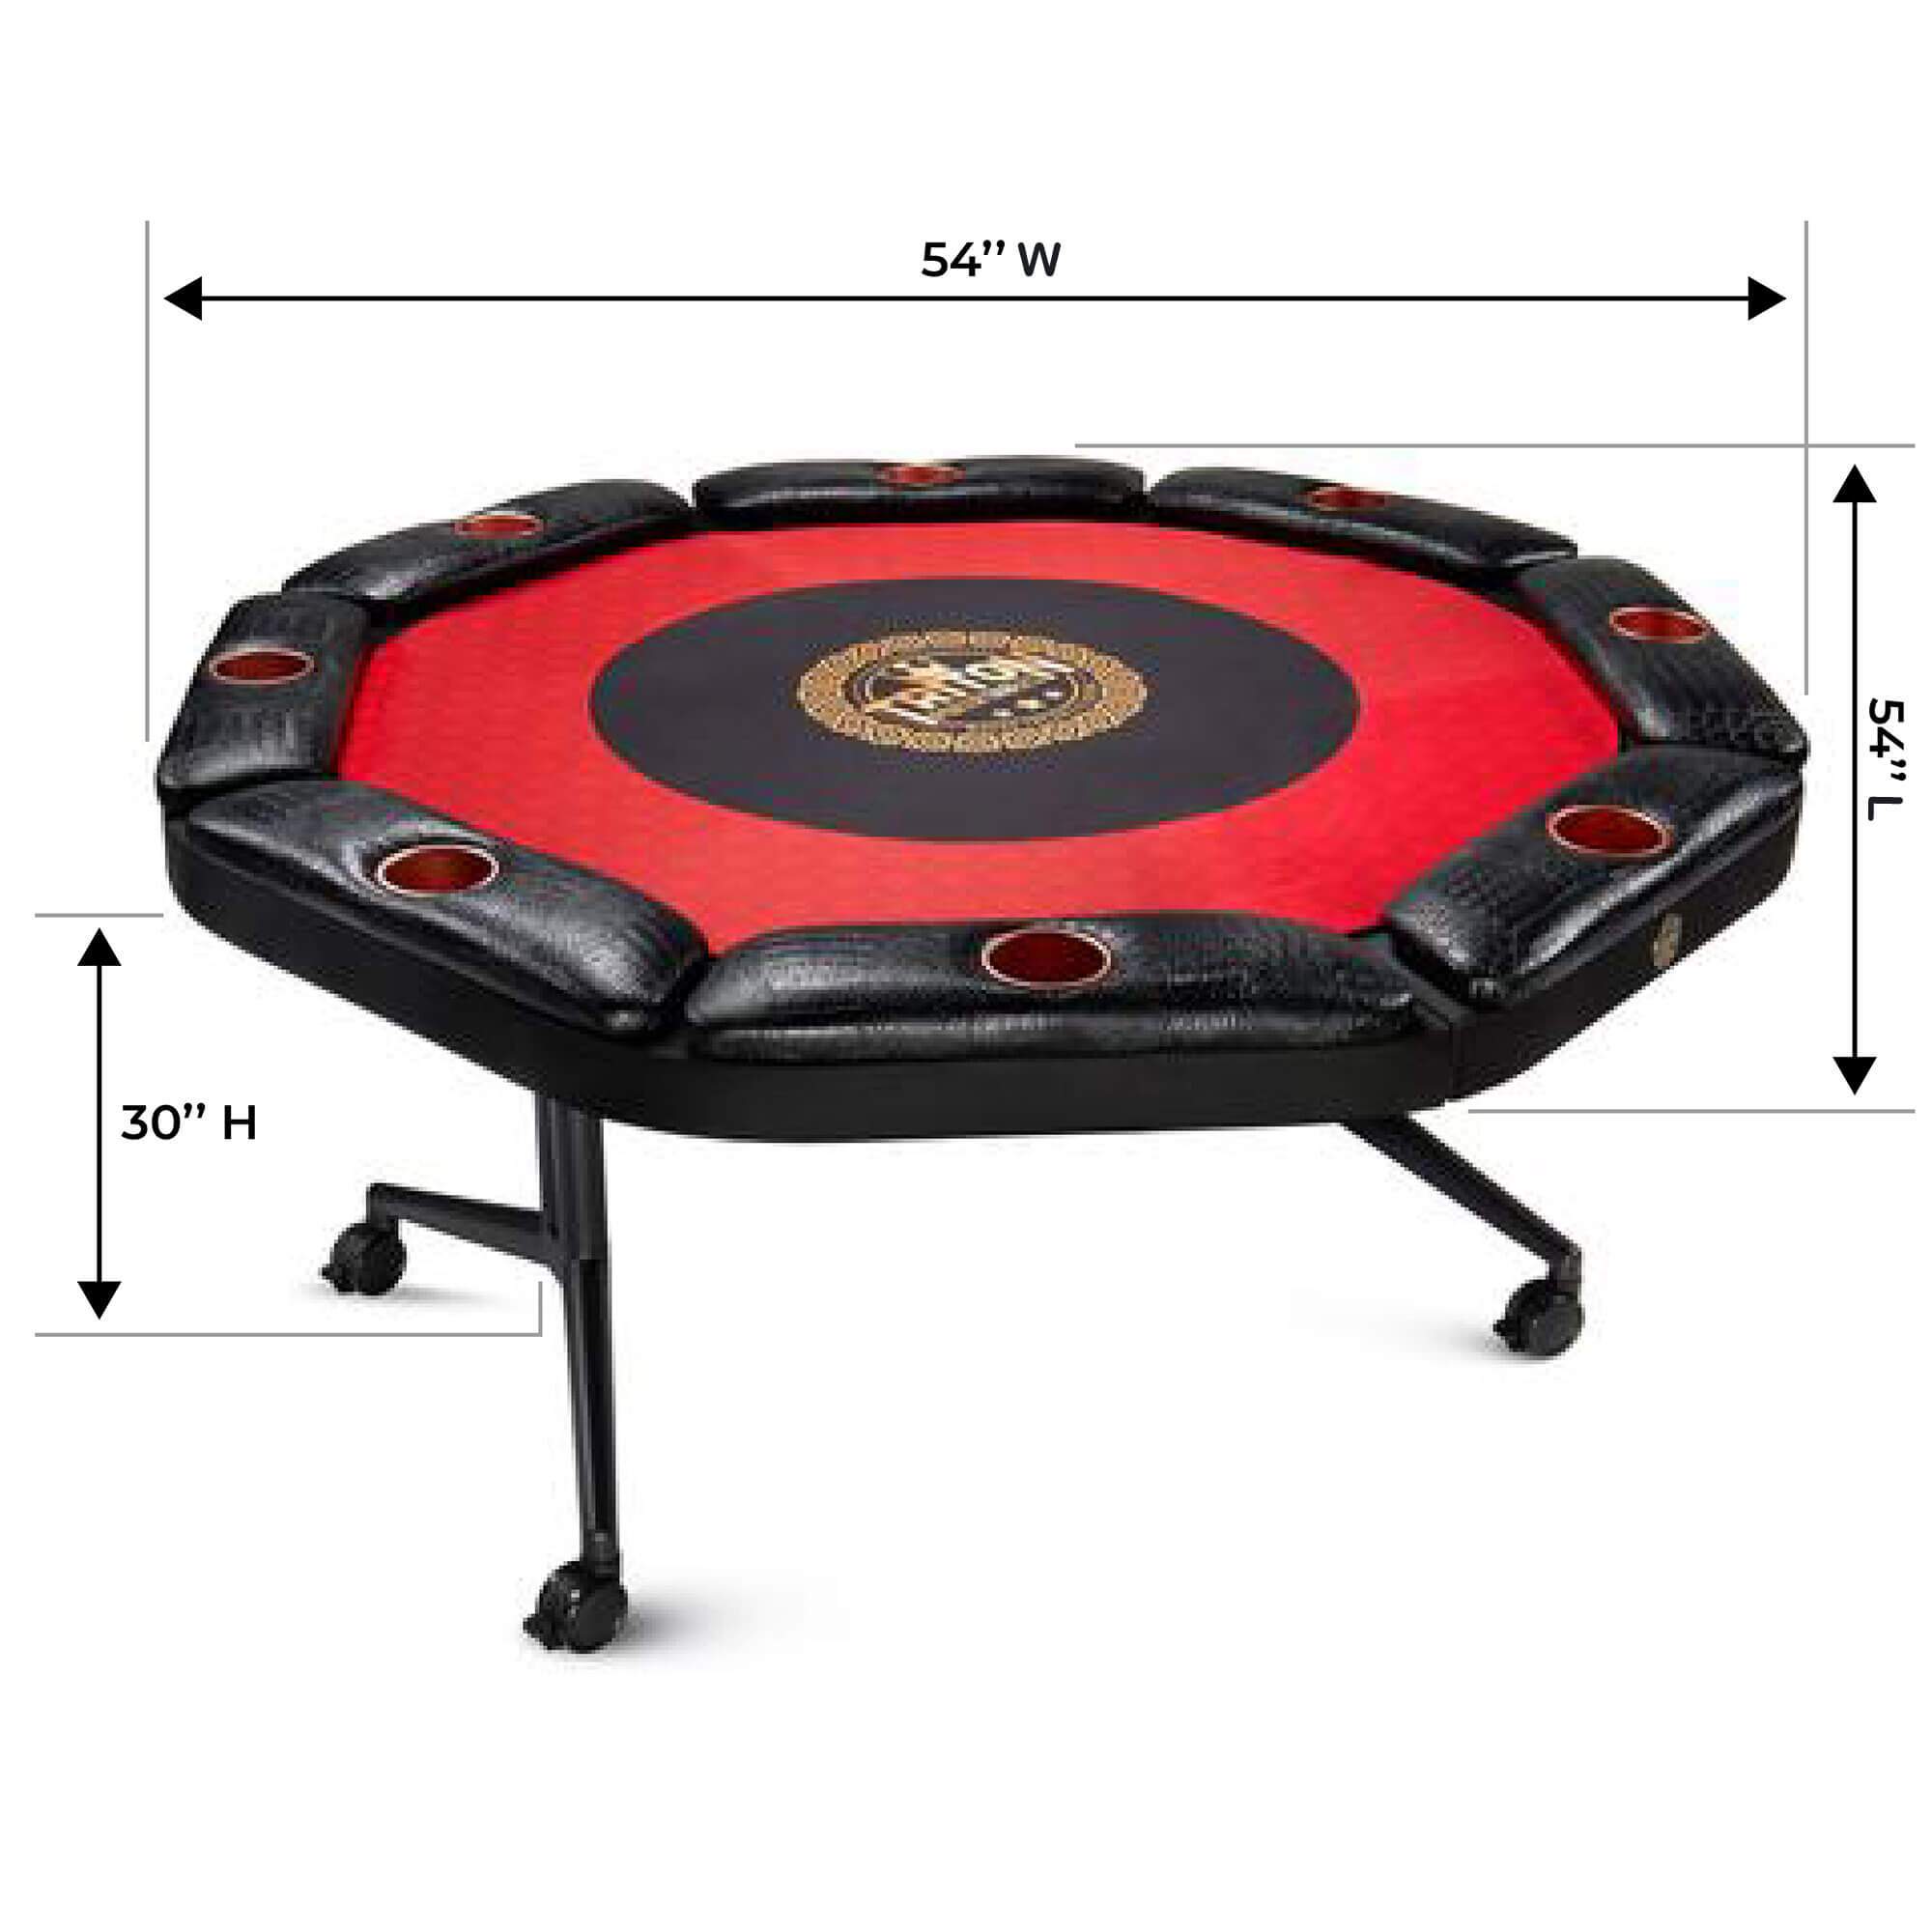 Triton Classic Folding 8 Player Cards Table